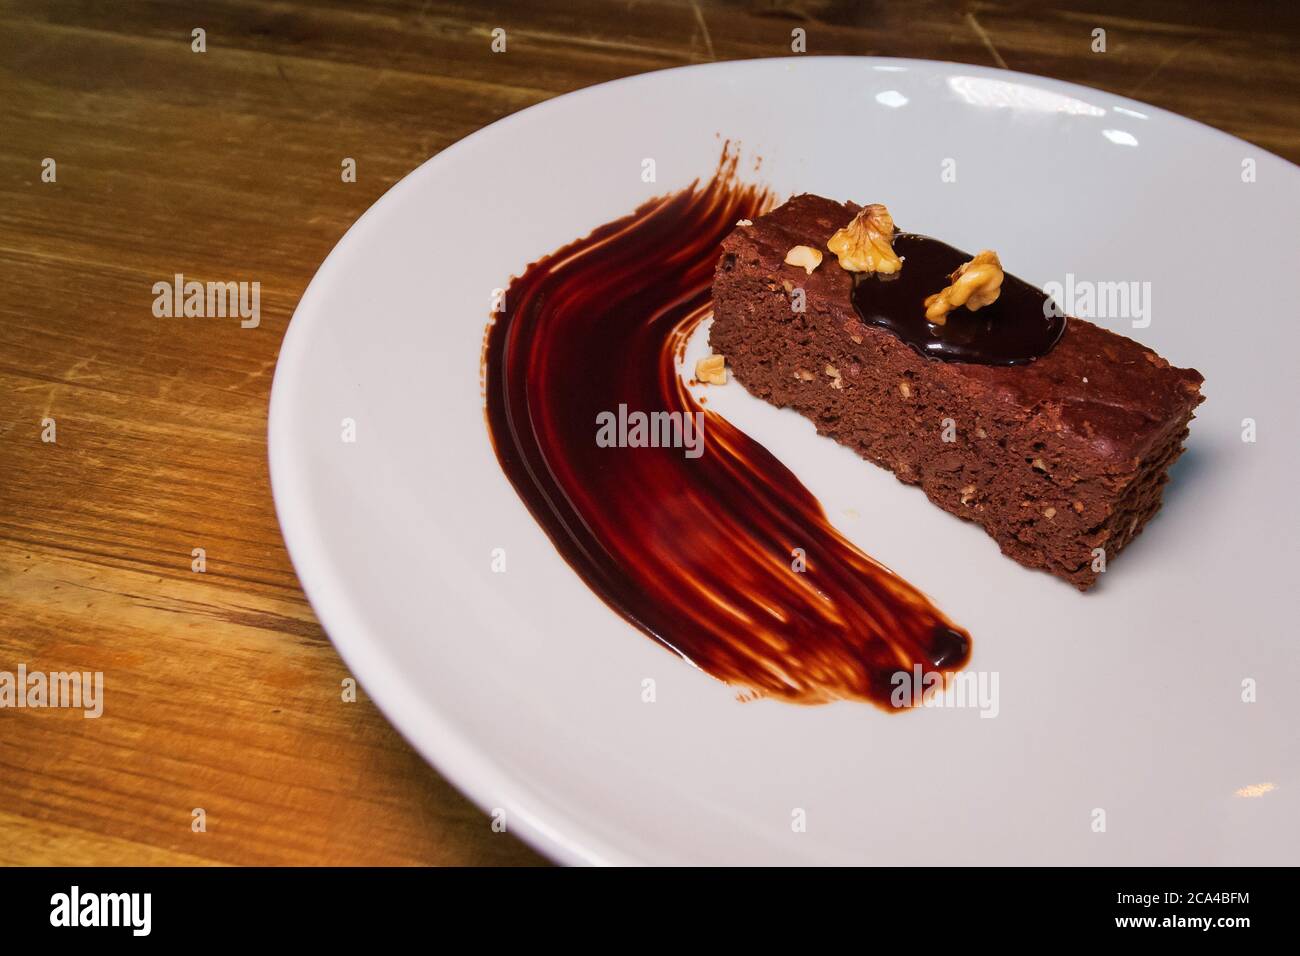 Brownie with chocolate syrup and hazelnuts. Stock Photo